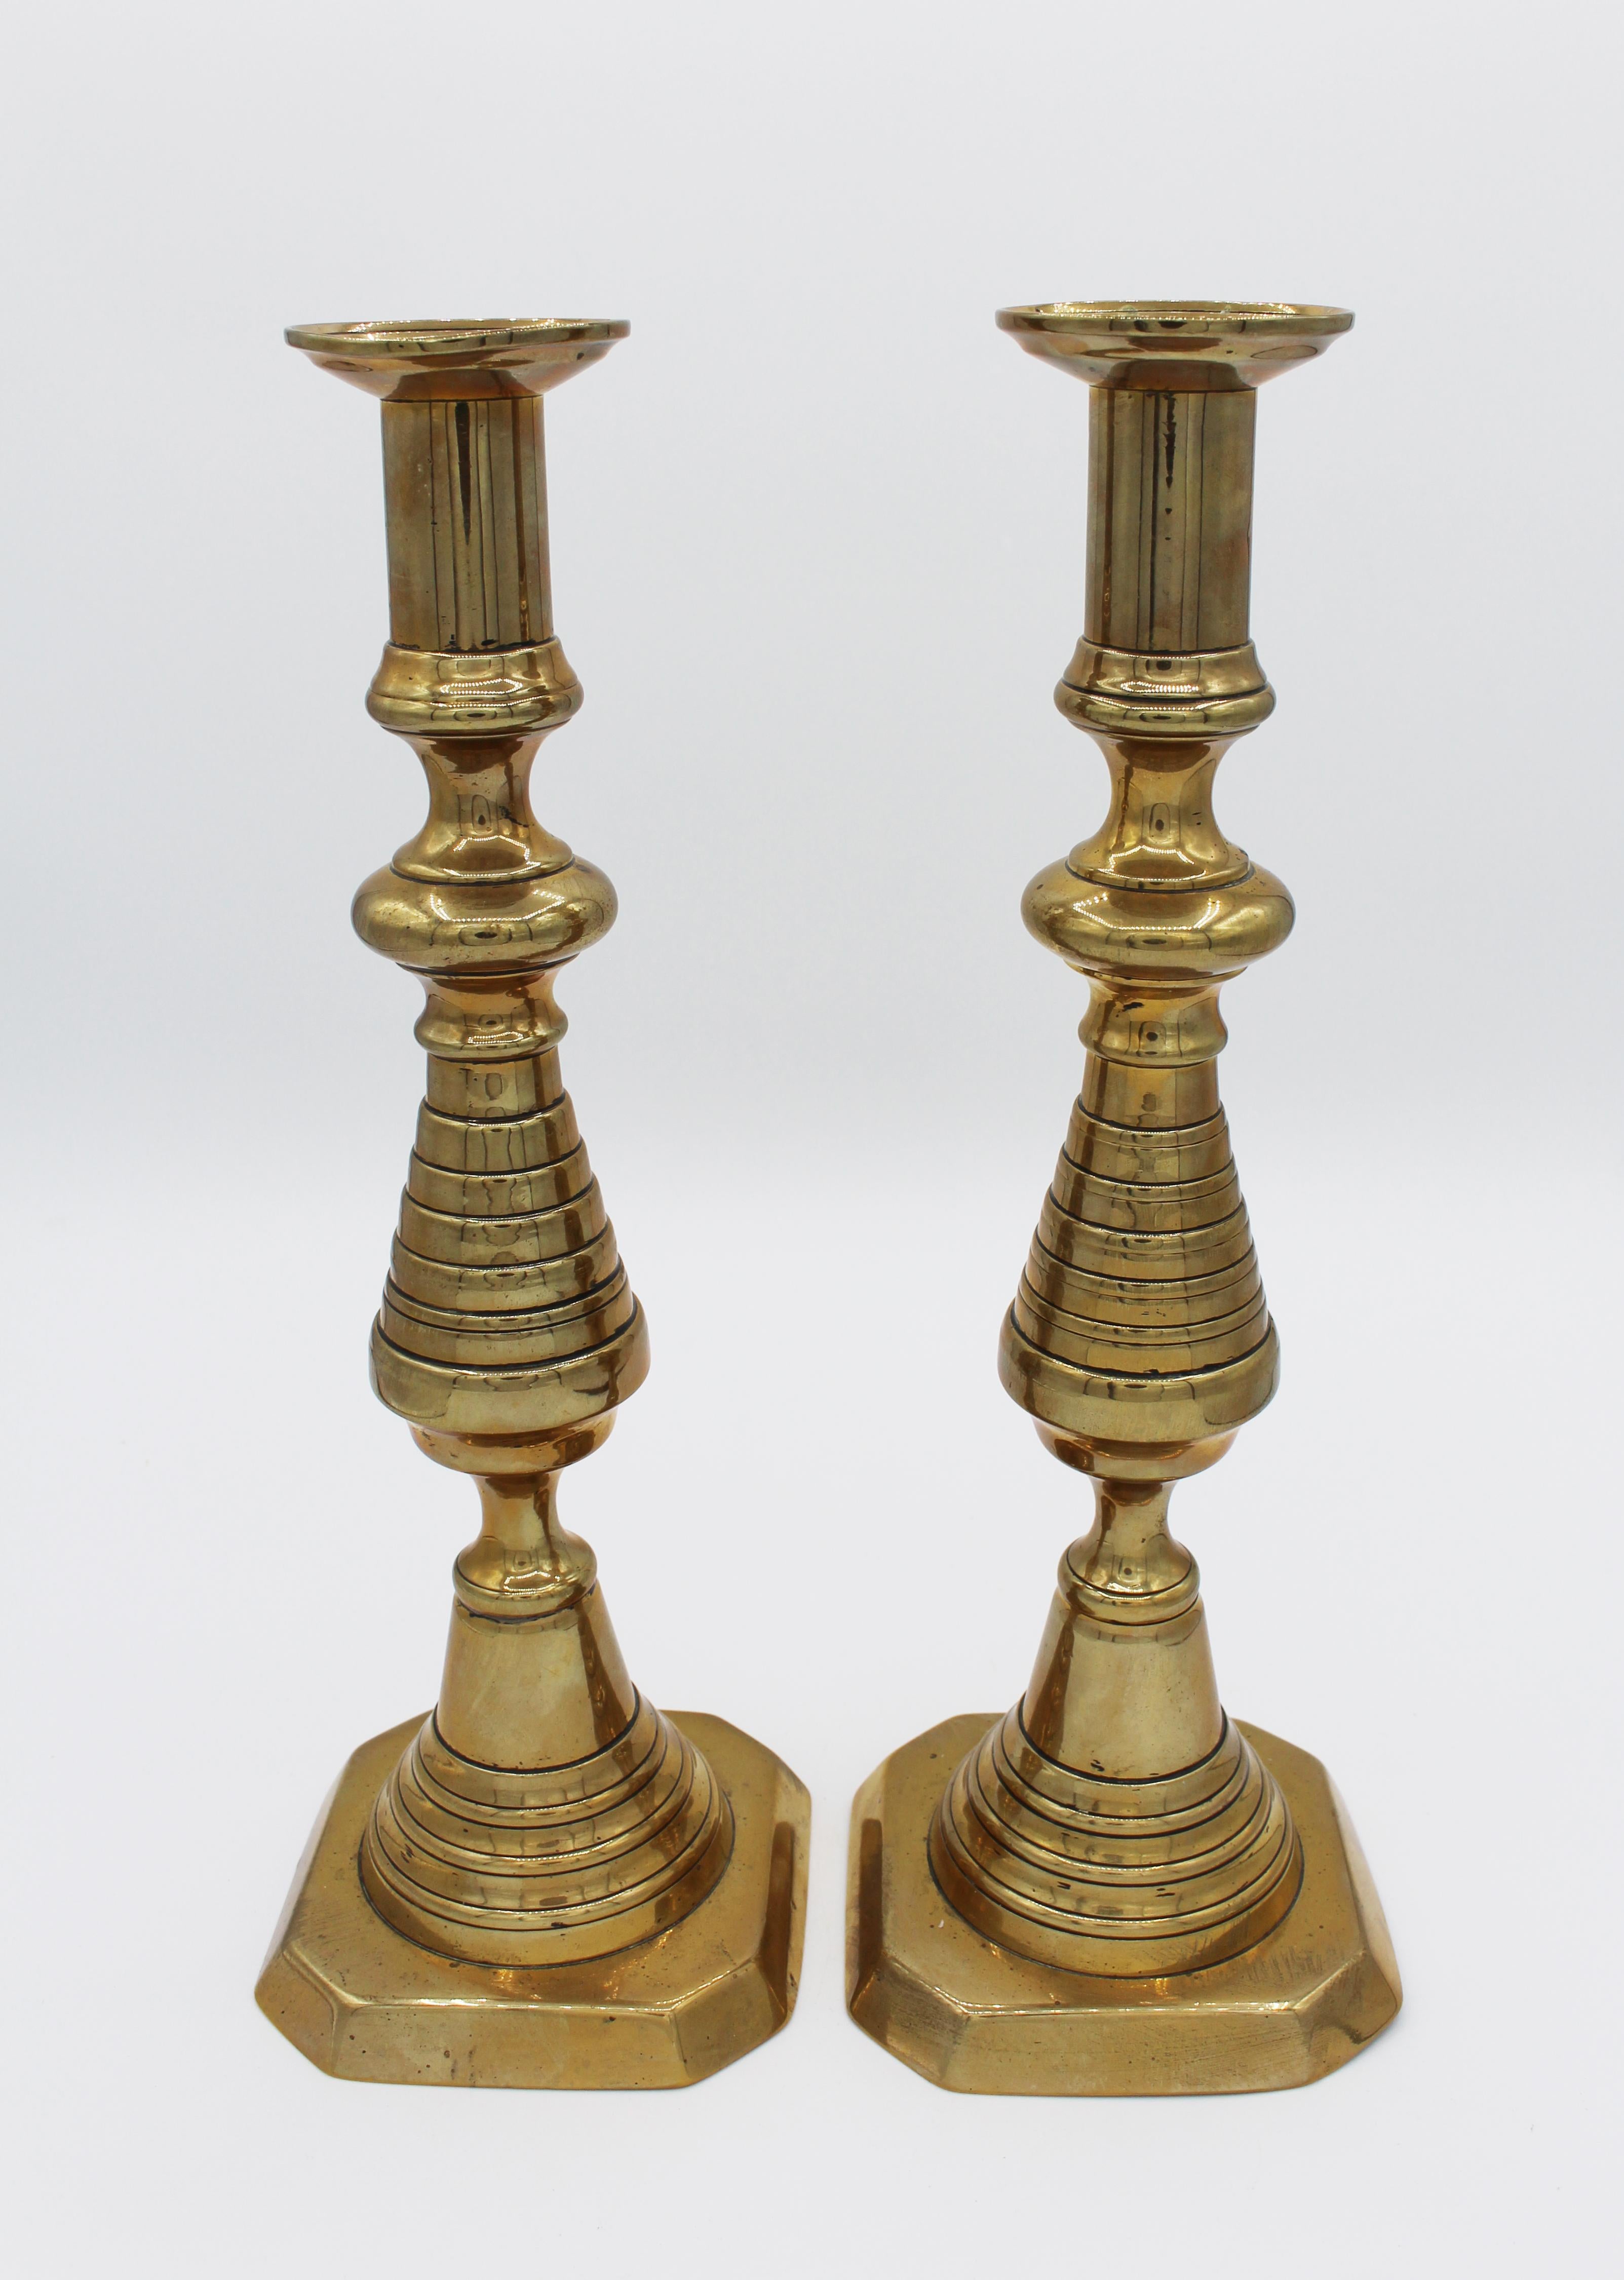 A fine large and bold pair of brass candlesticks, c. 1860, English. Classic inverted brass beehive form. Both with push rod mechanisms in-tact. One base slightly wobbly. Measures: 12